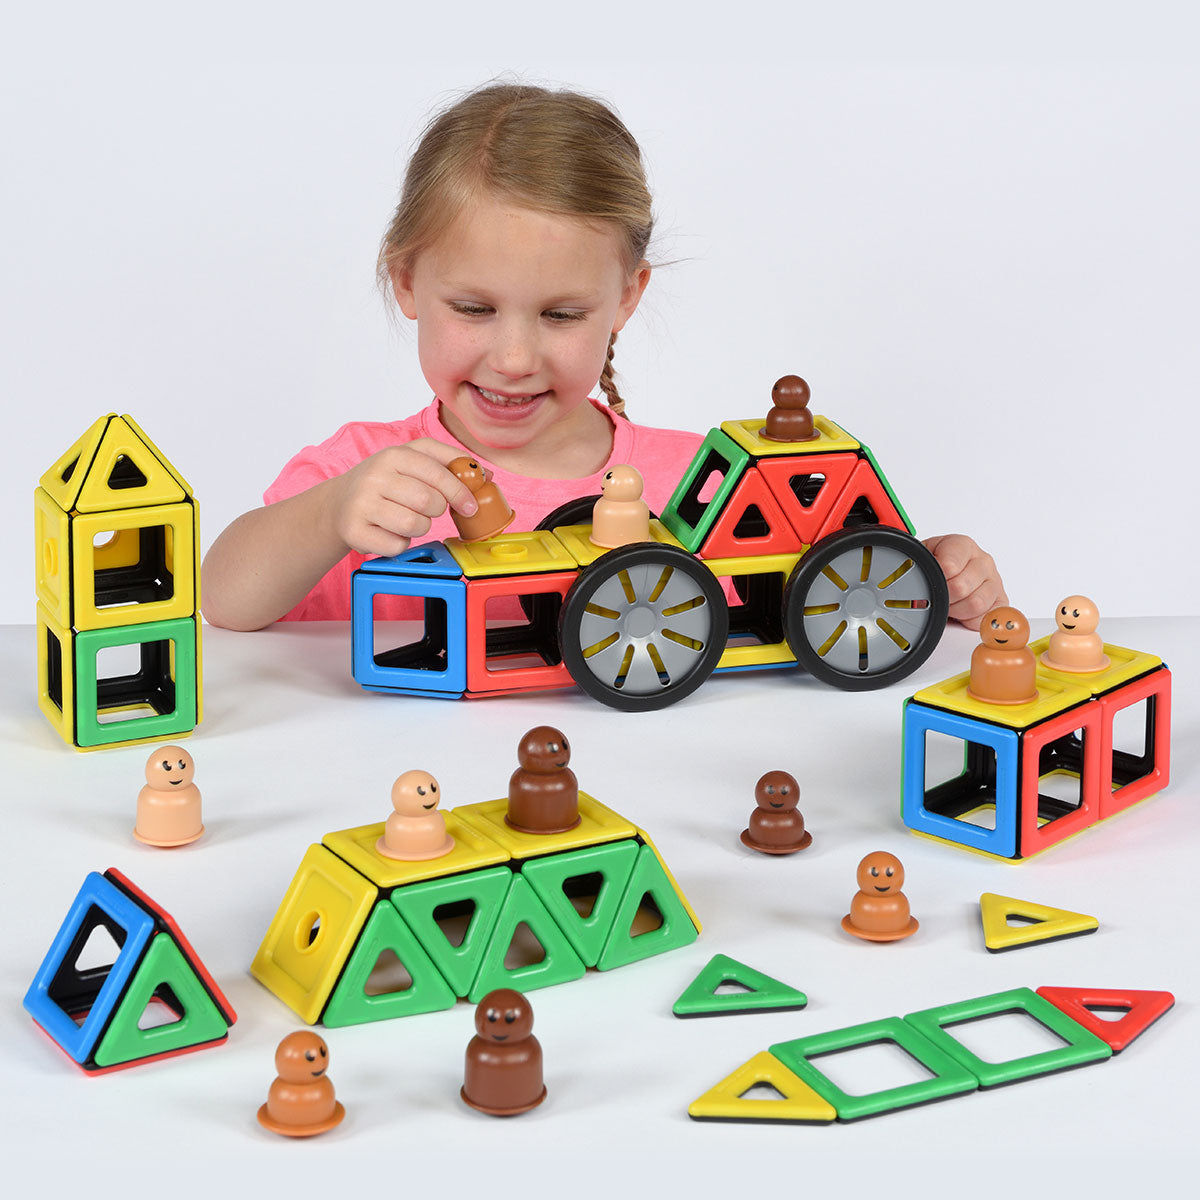 Magnetic Polydron Drivers Set, The Magnetic Polydron Drivers Set offers children a fun and educational way to explore the world of vehicles and learn about basic engineering principles. With 92 magnetic pieces, including wheels, squares, triangles, hub squares, and figures, kids can build their own cars, trucks, and more. This Magnetic Polydron Drivers Set encourages children to use their imagination and creativity while developing fine motor skills. They will learn how to grab, pull, and push the pieces, e